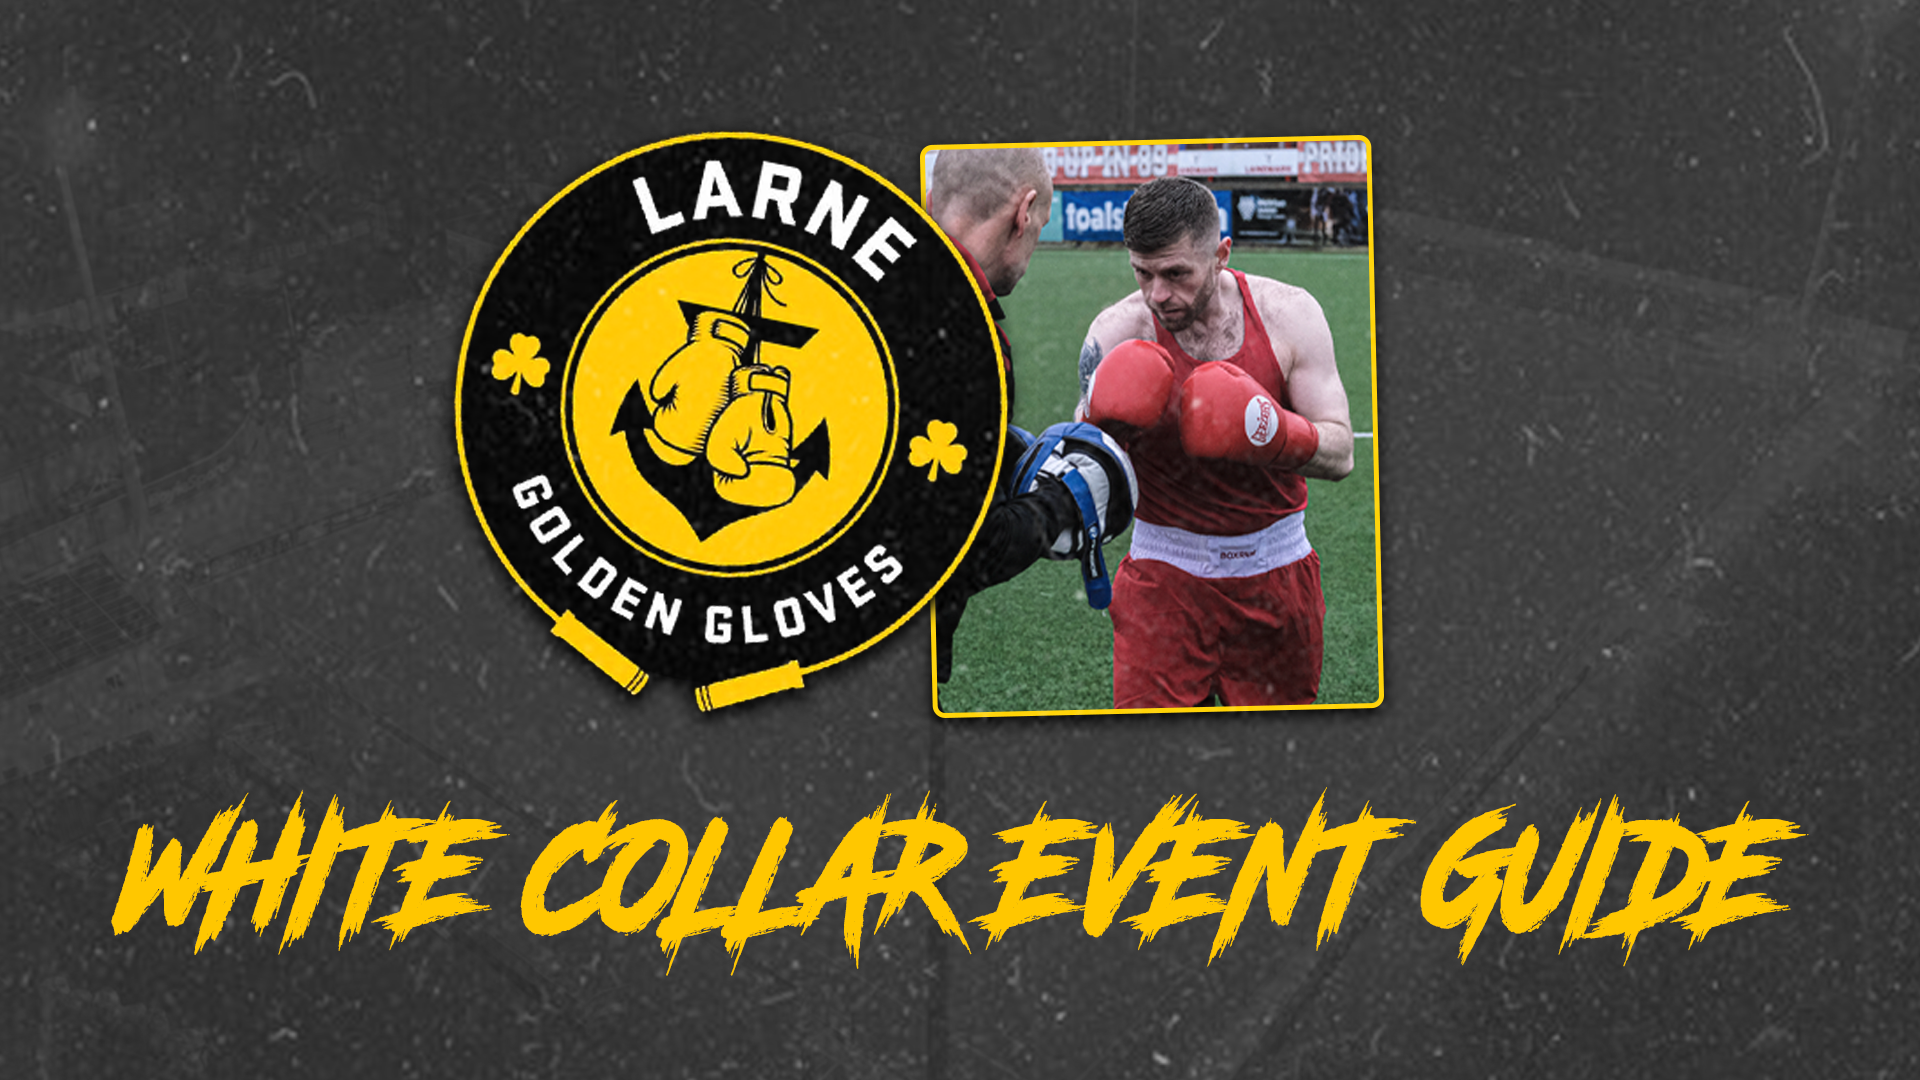 White Collar Boxing: All you need to know | Larne FC